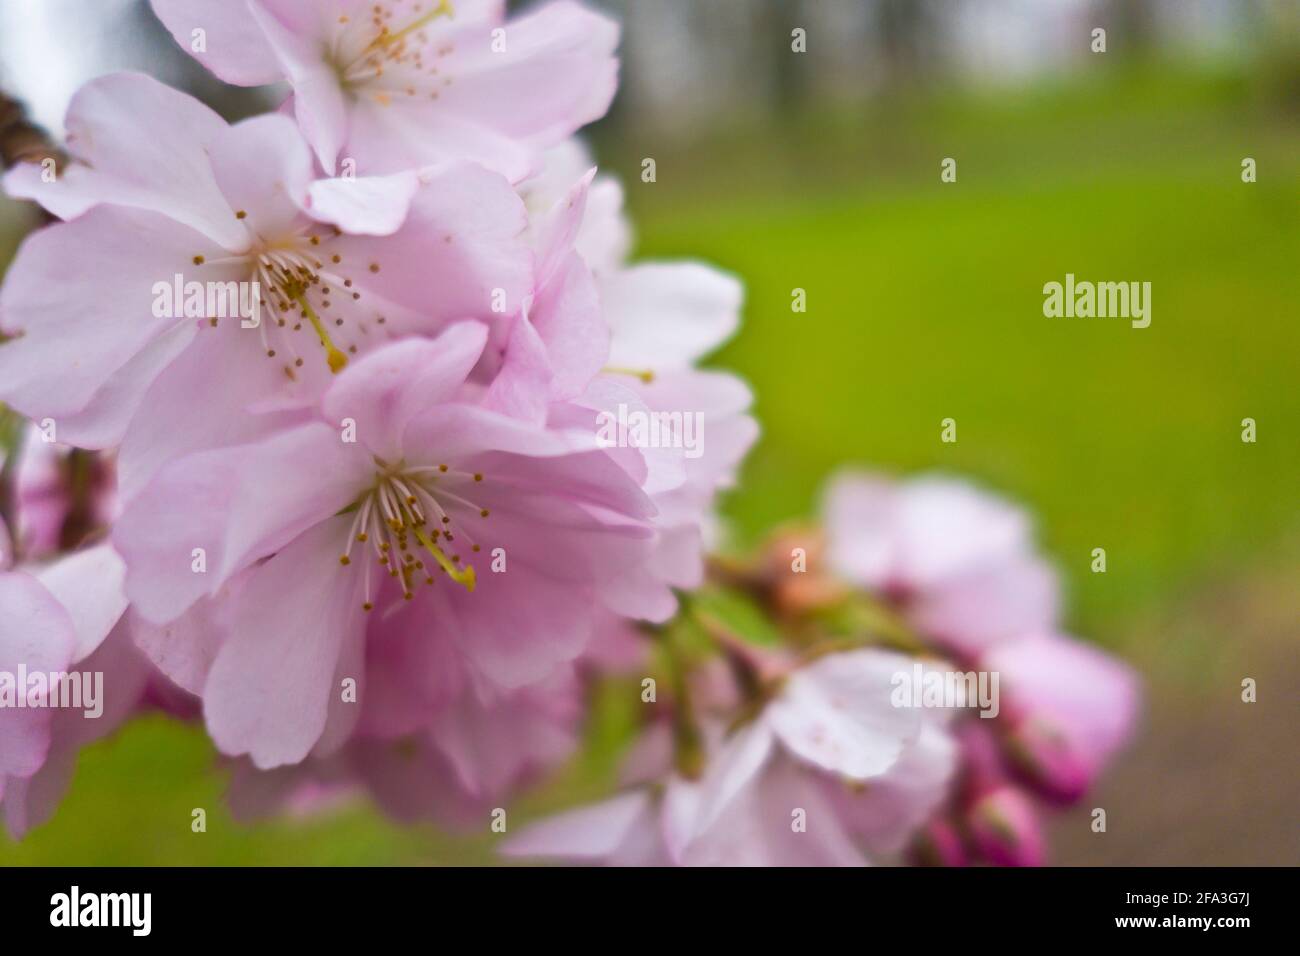 pink cherry blossoms flowers Stock Photo